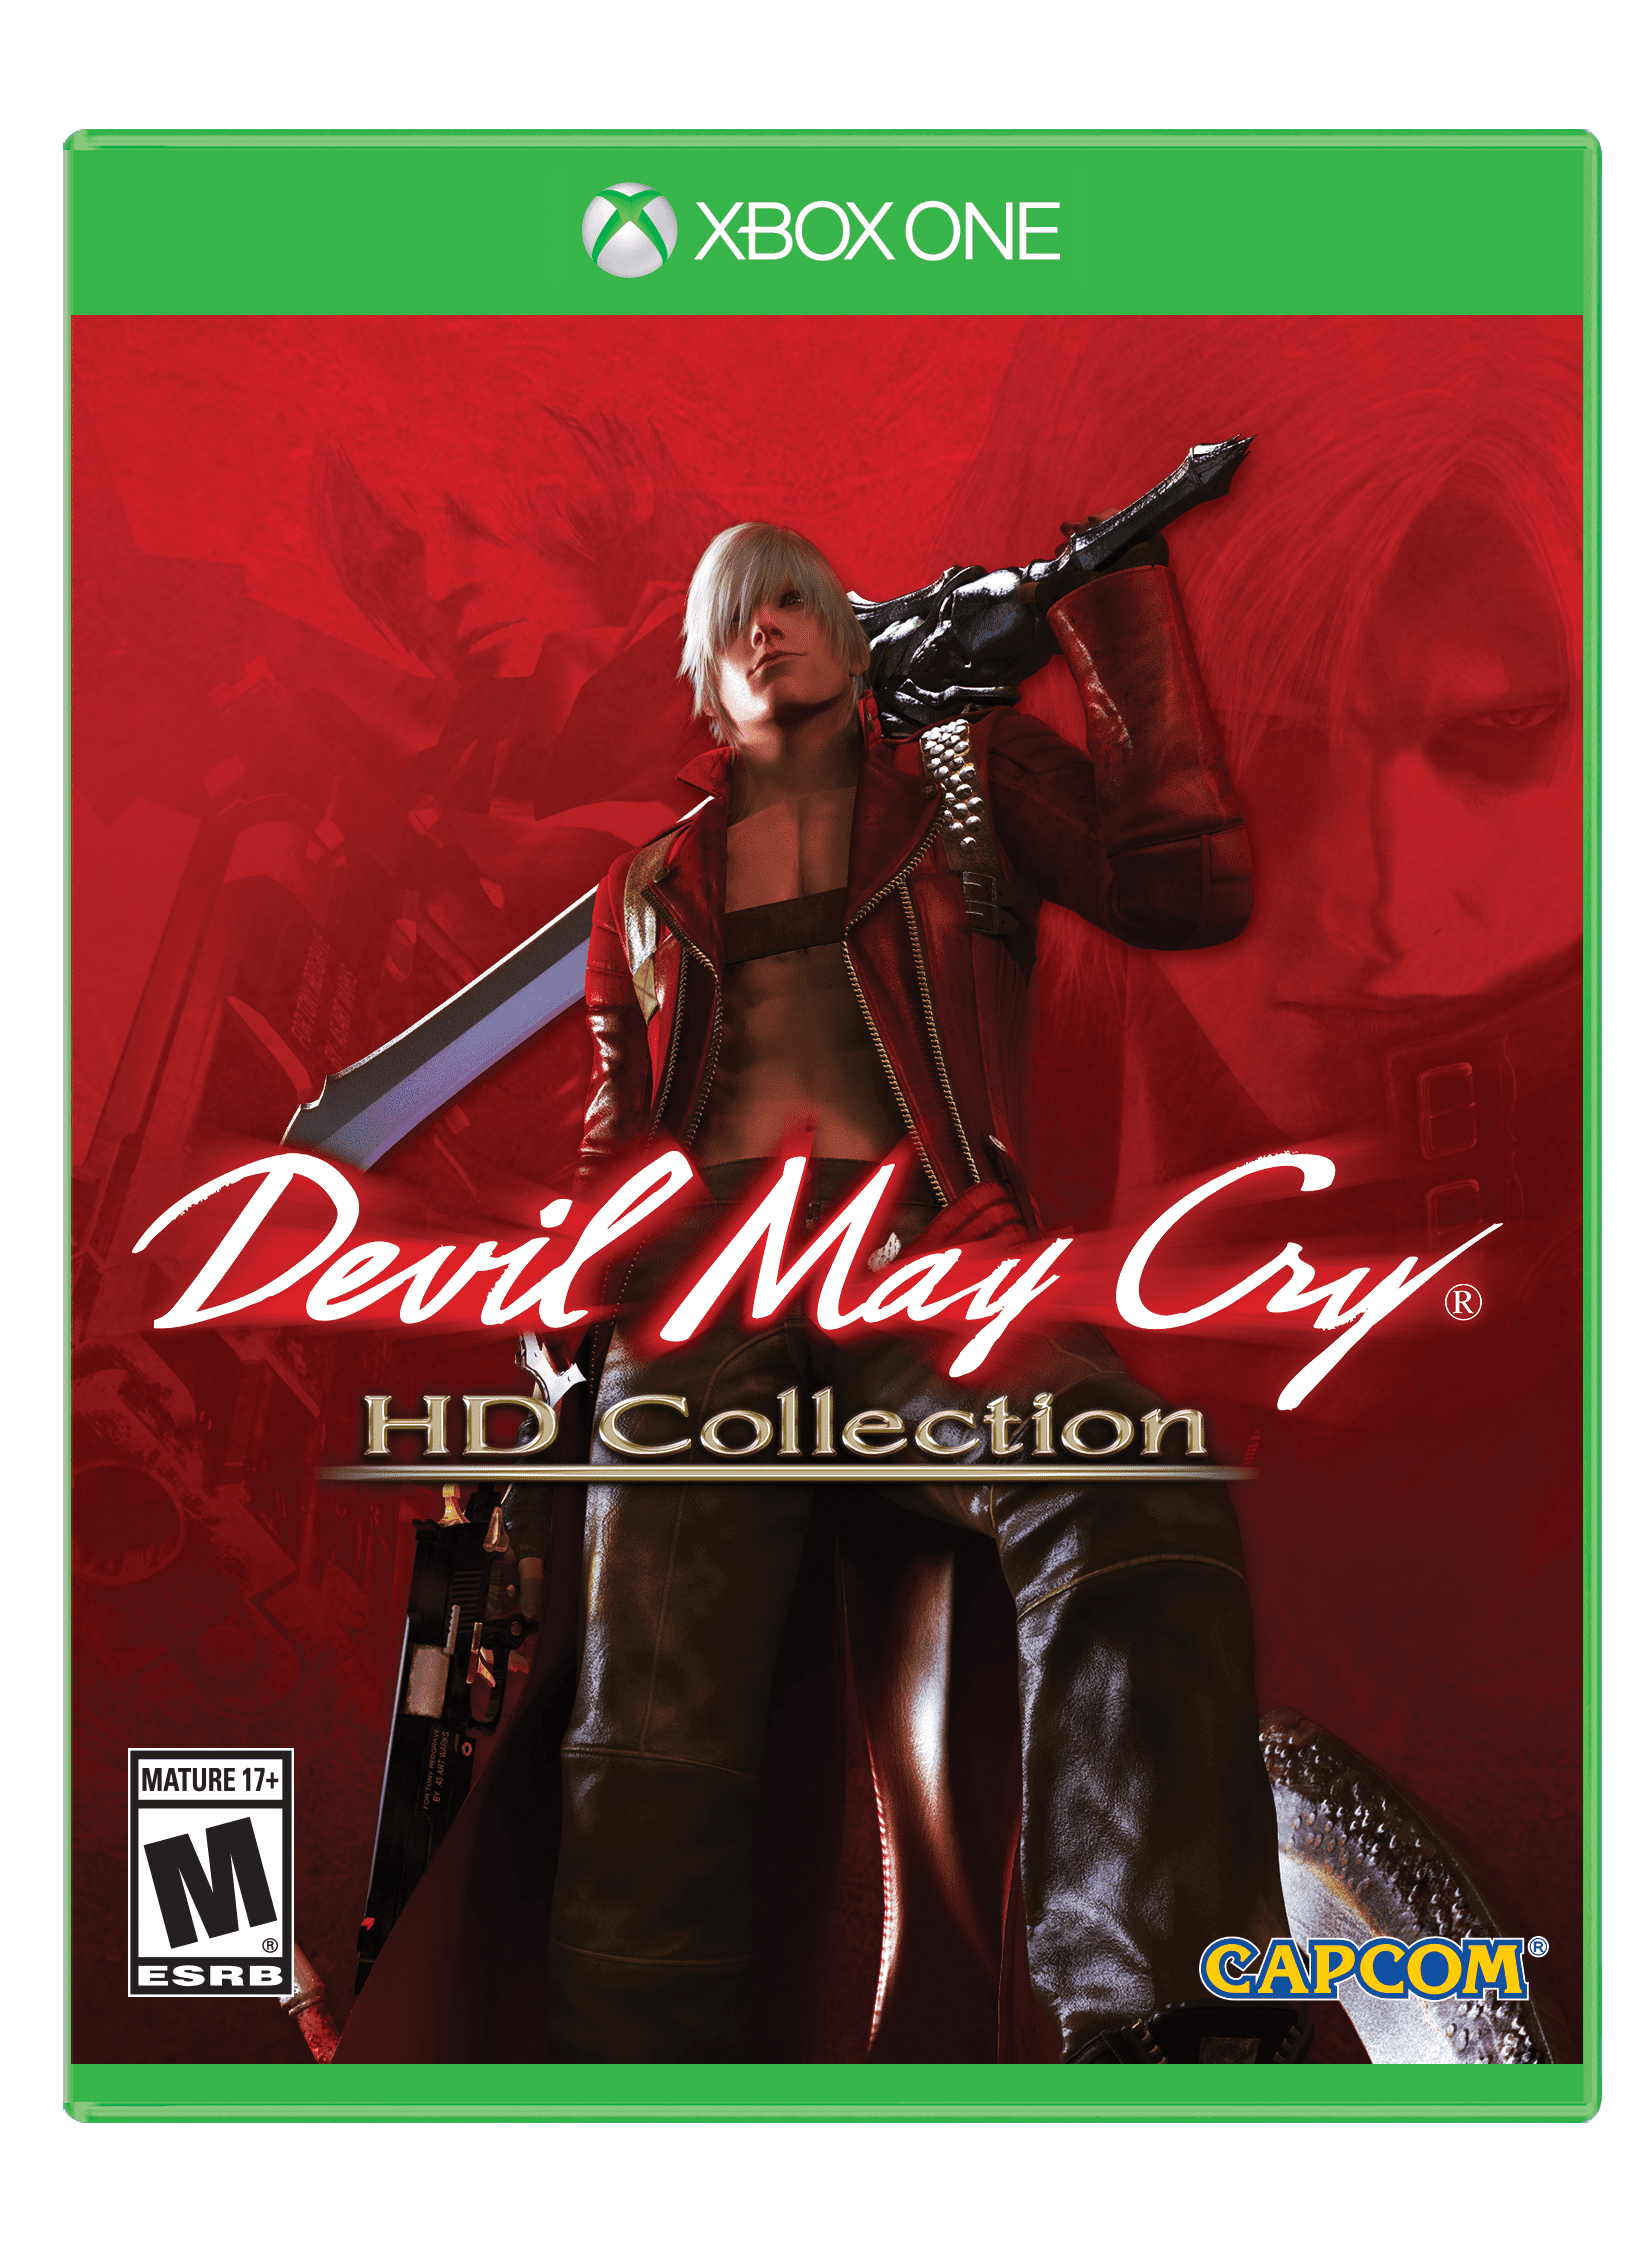 Capcom's Devil May Cry 5: Special Edition is officially announced :  r/TwoBestFriendsPlay